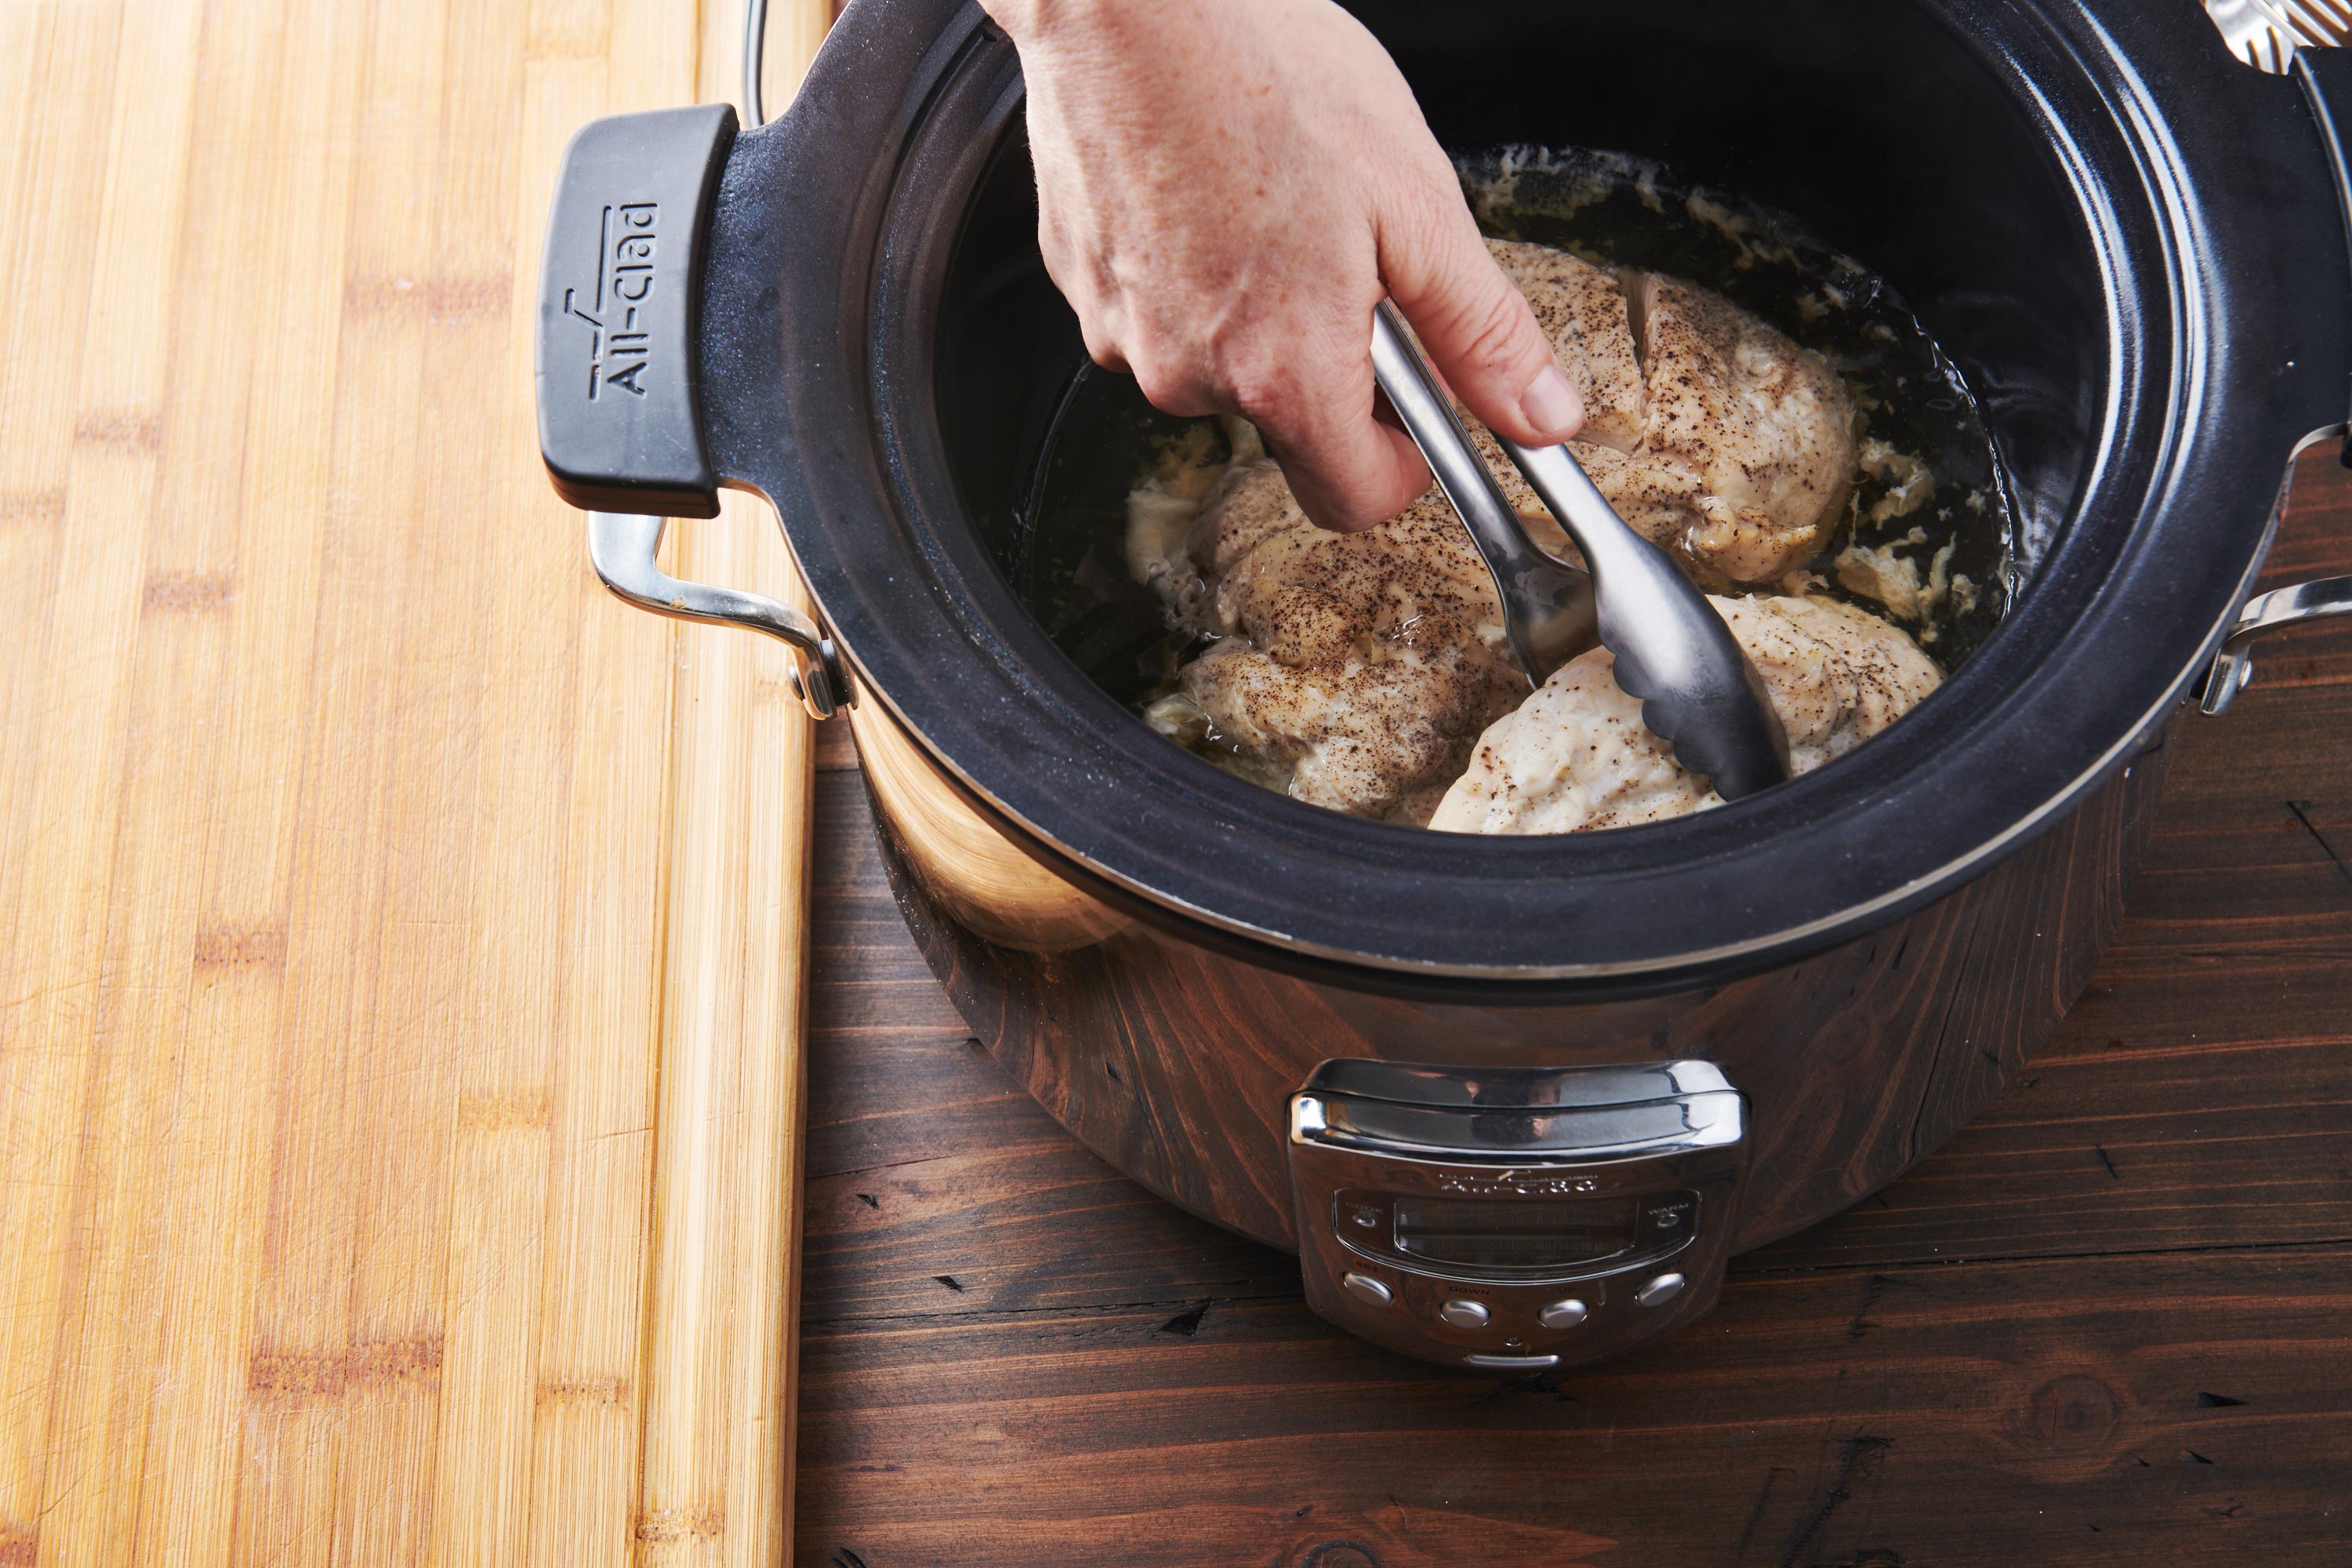 Tongs pulling chicken from a slow cooker.